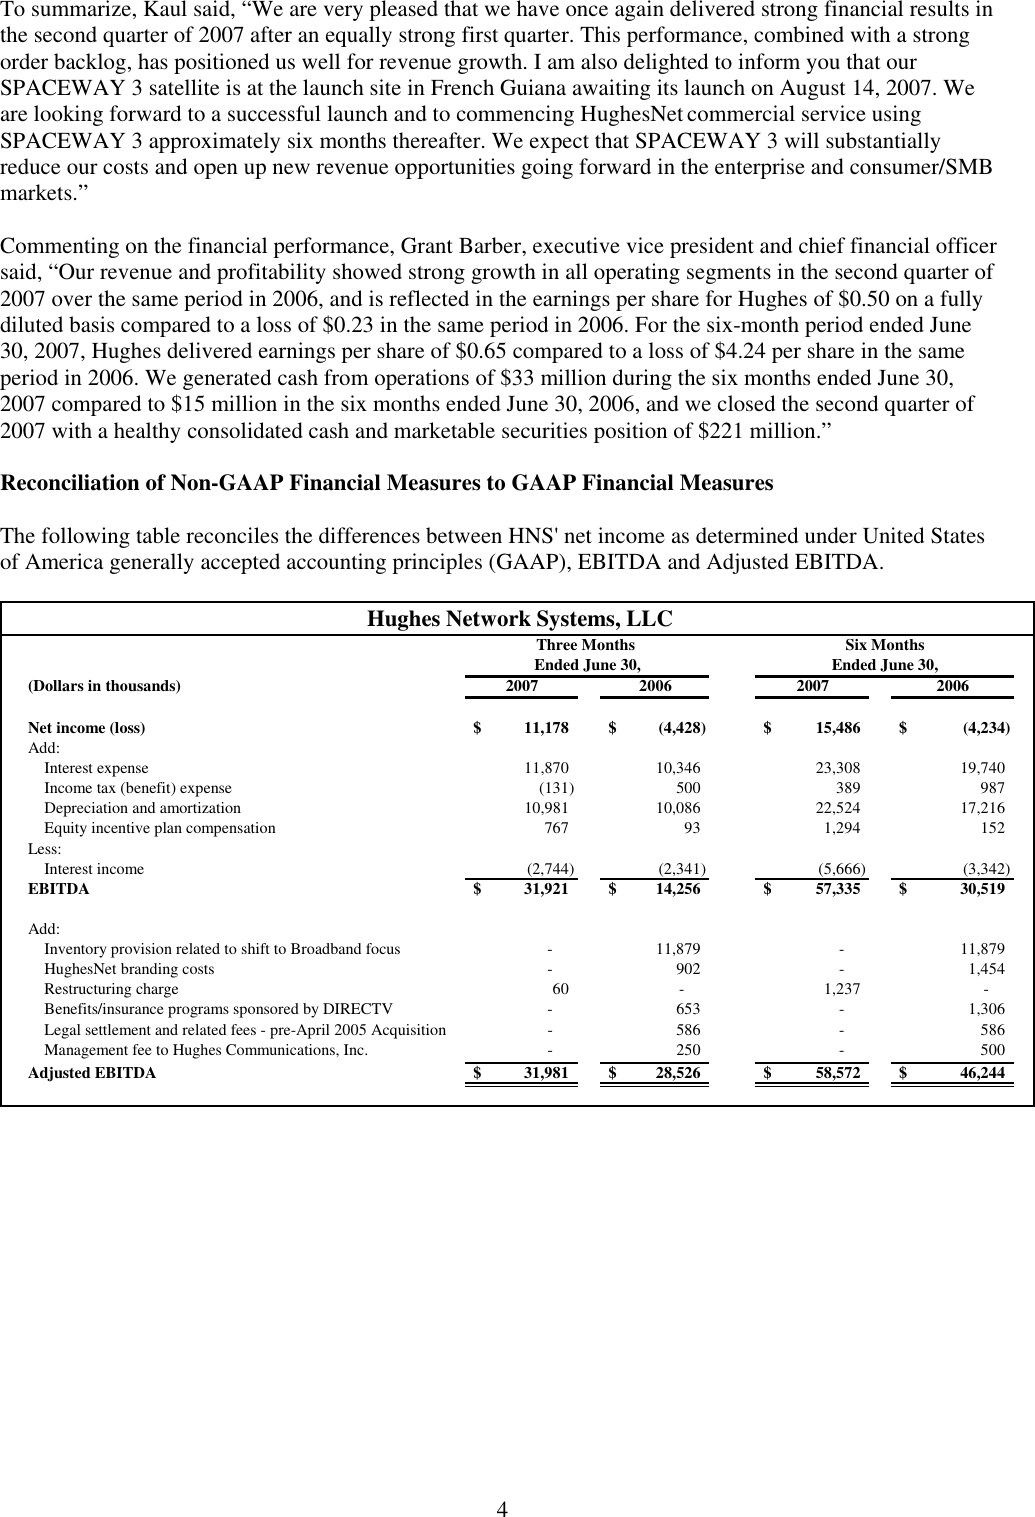 Page 4 of 12 - Q2-07 Earnings Release  08-09-07 08 09 07